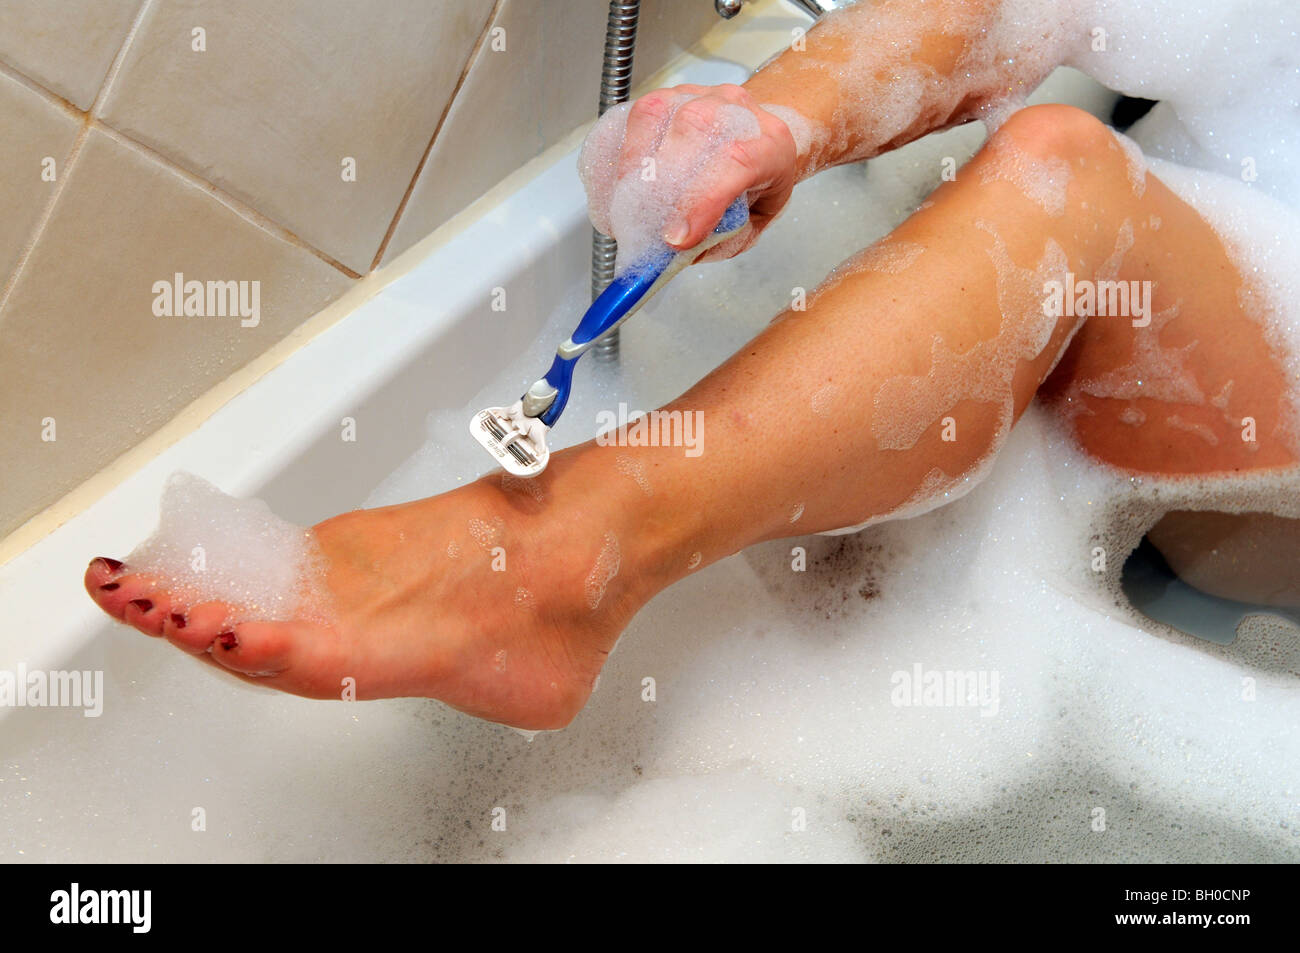 Woman using a Gillette safety razor to shave her legs Stock Photo